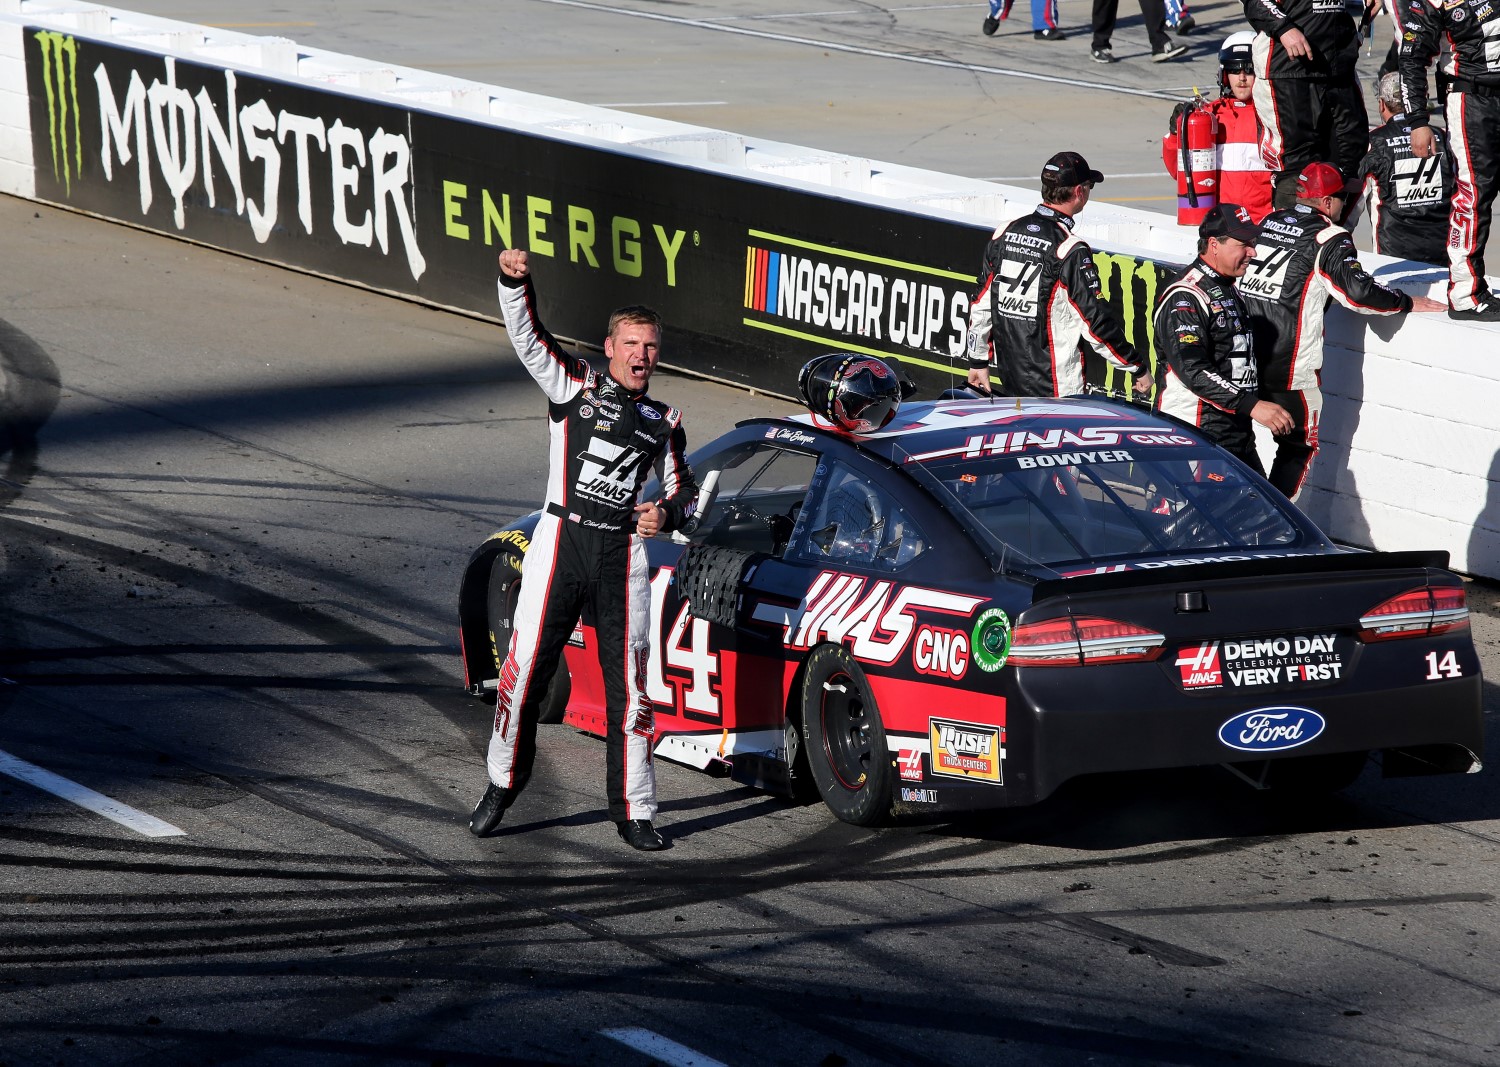 Not many saw Clint Bowyer's victory